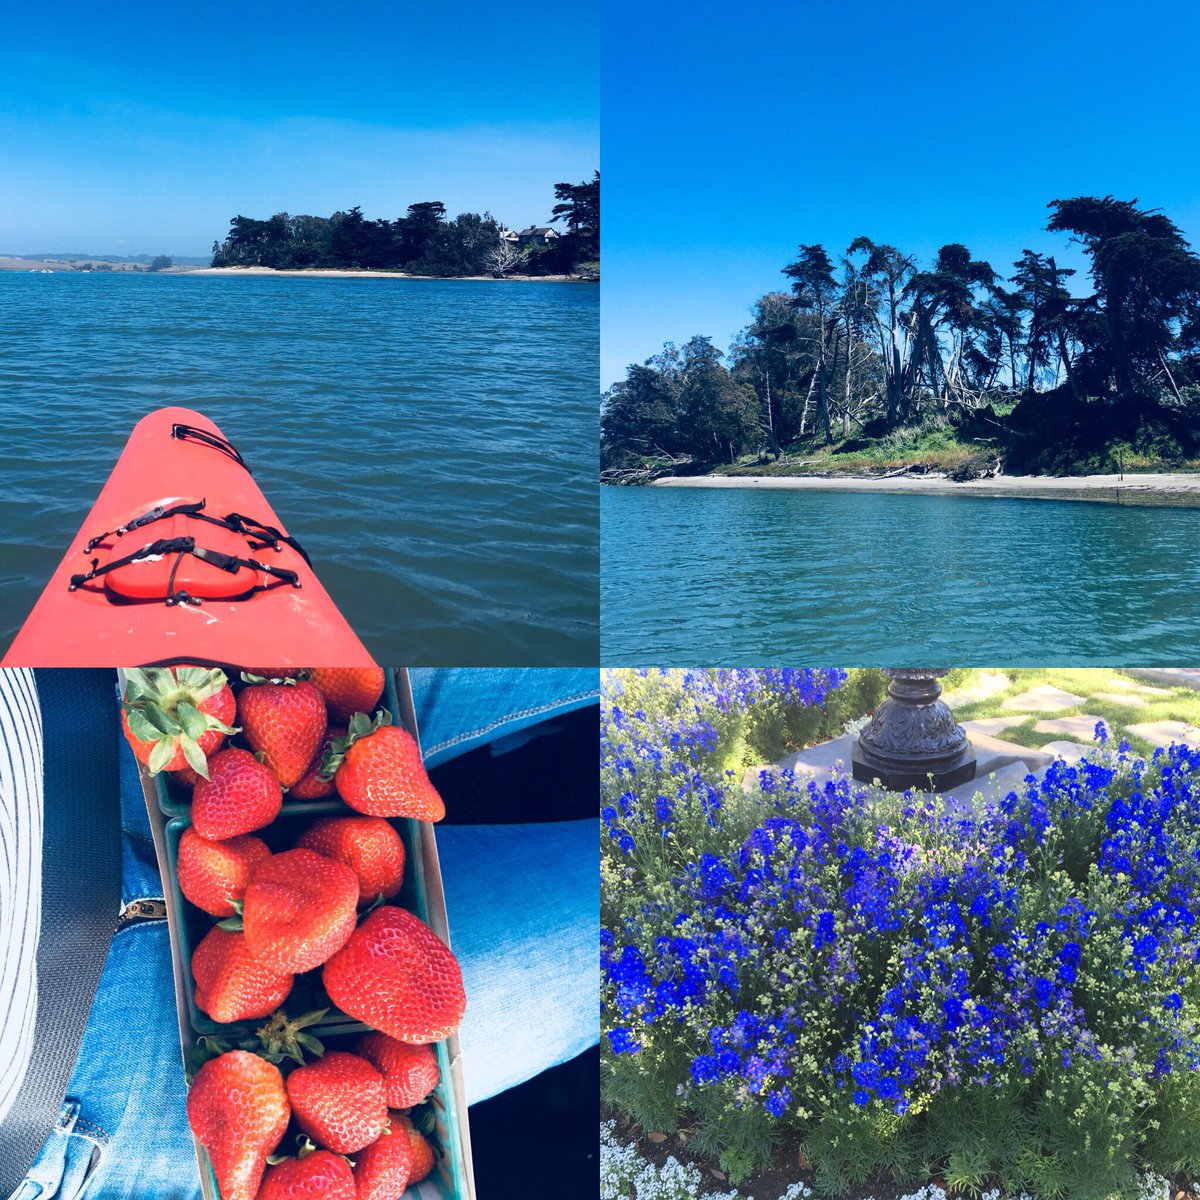 Kayaking, sea otters, and farmers’ markets 🌽🍓🚣‍♂️ Another great day in Monterey 🐋 #Mosslanding #elkhornslough #california #seaotters #seals #sealions #marinelife